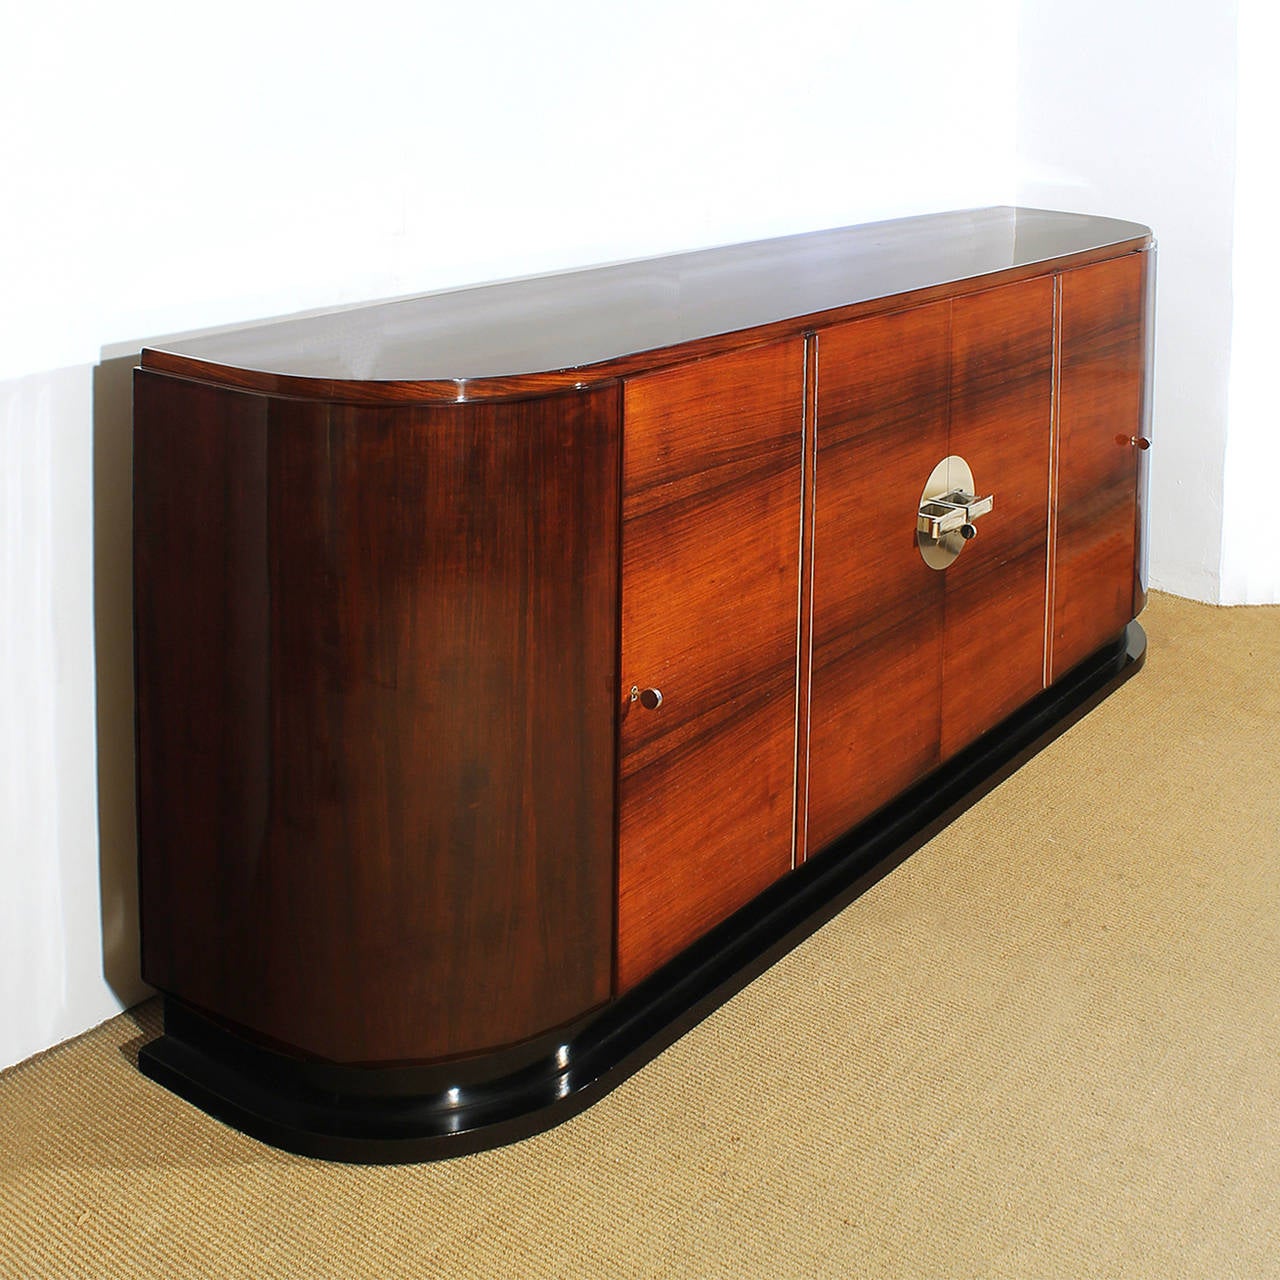 Plated Splendid French Art Deco Rounded Sideboard